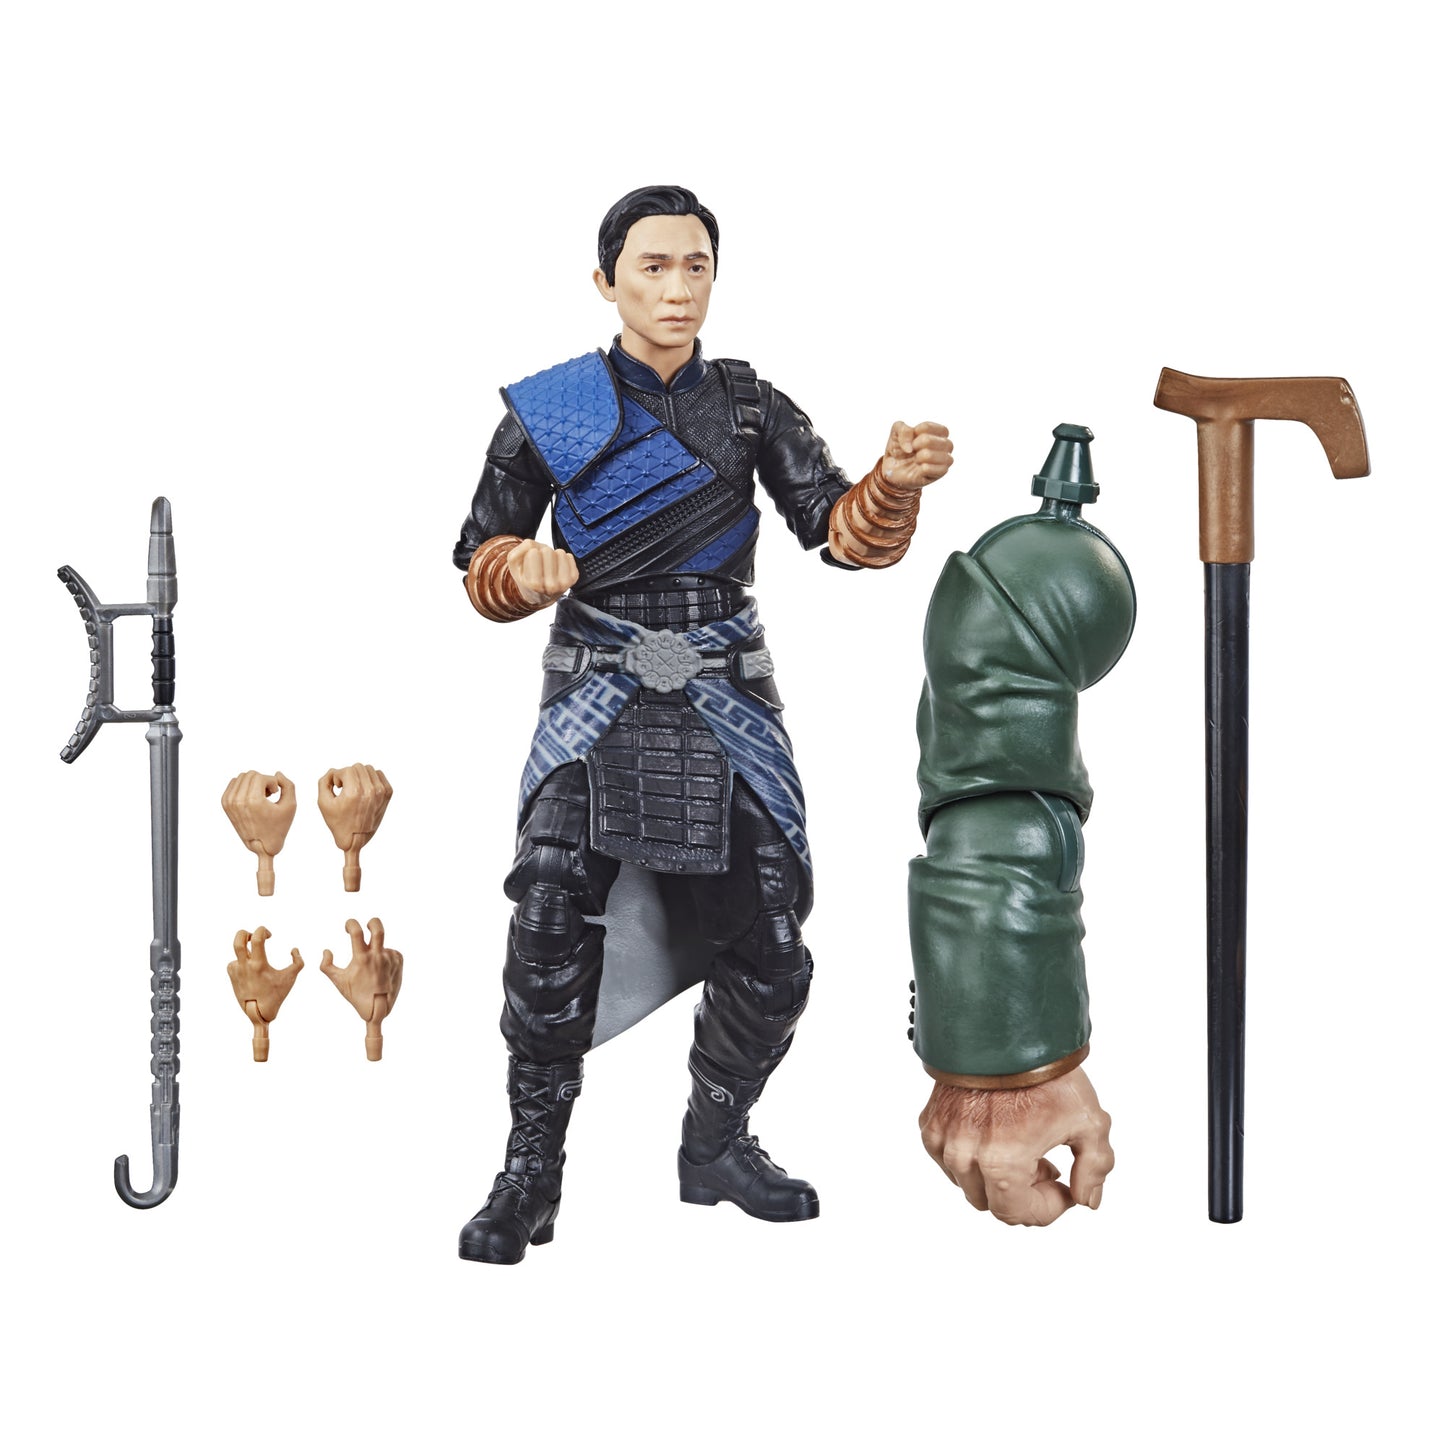 Marvel Legends Series - Shang-Chi And The Legend Of The Ten Rings: Wenwu 6" Action Figure